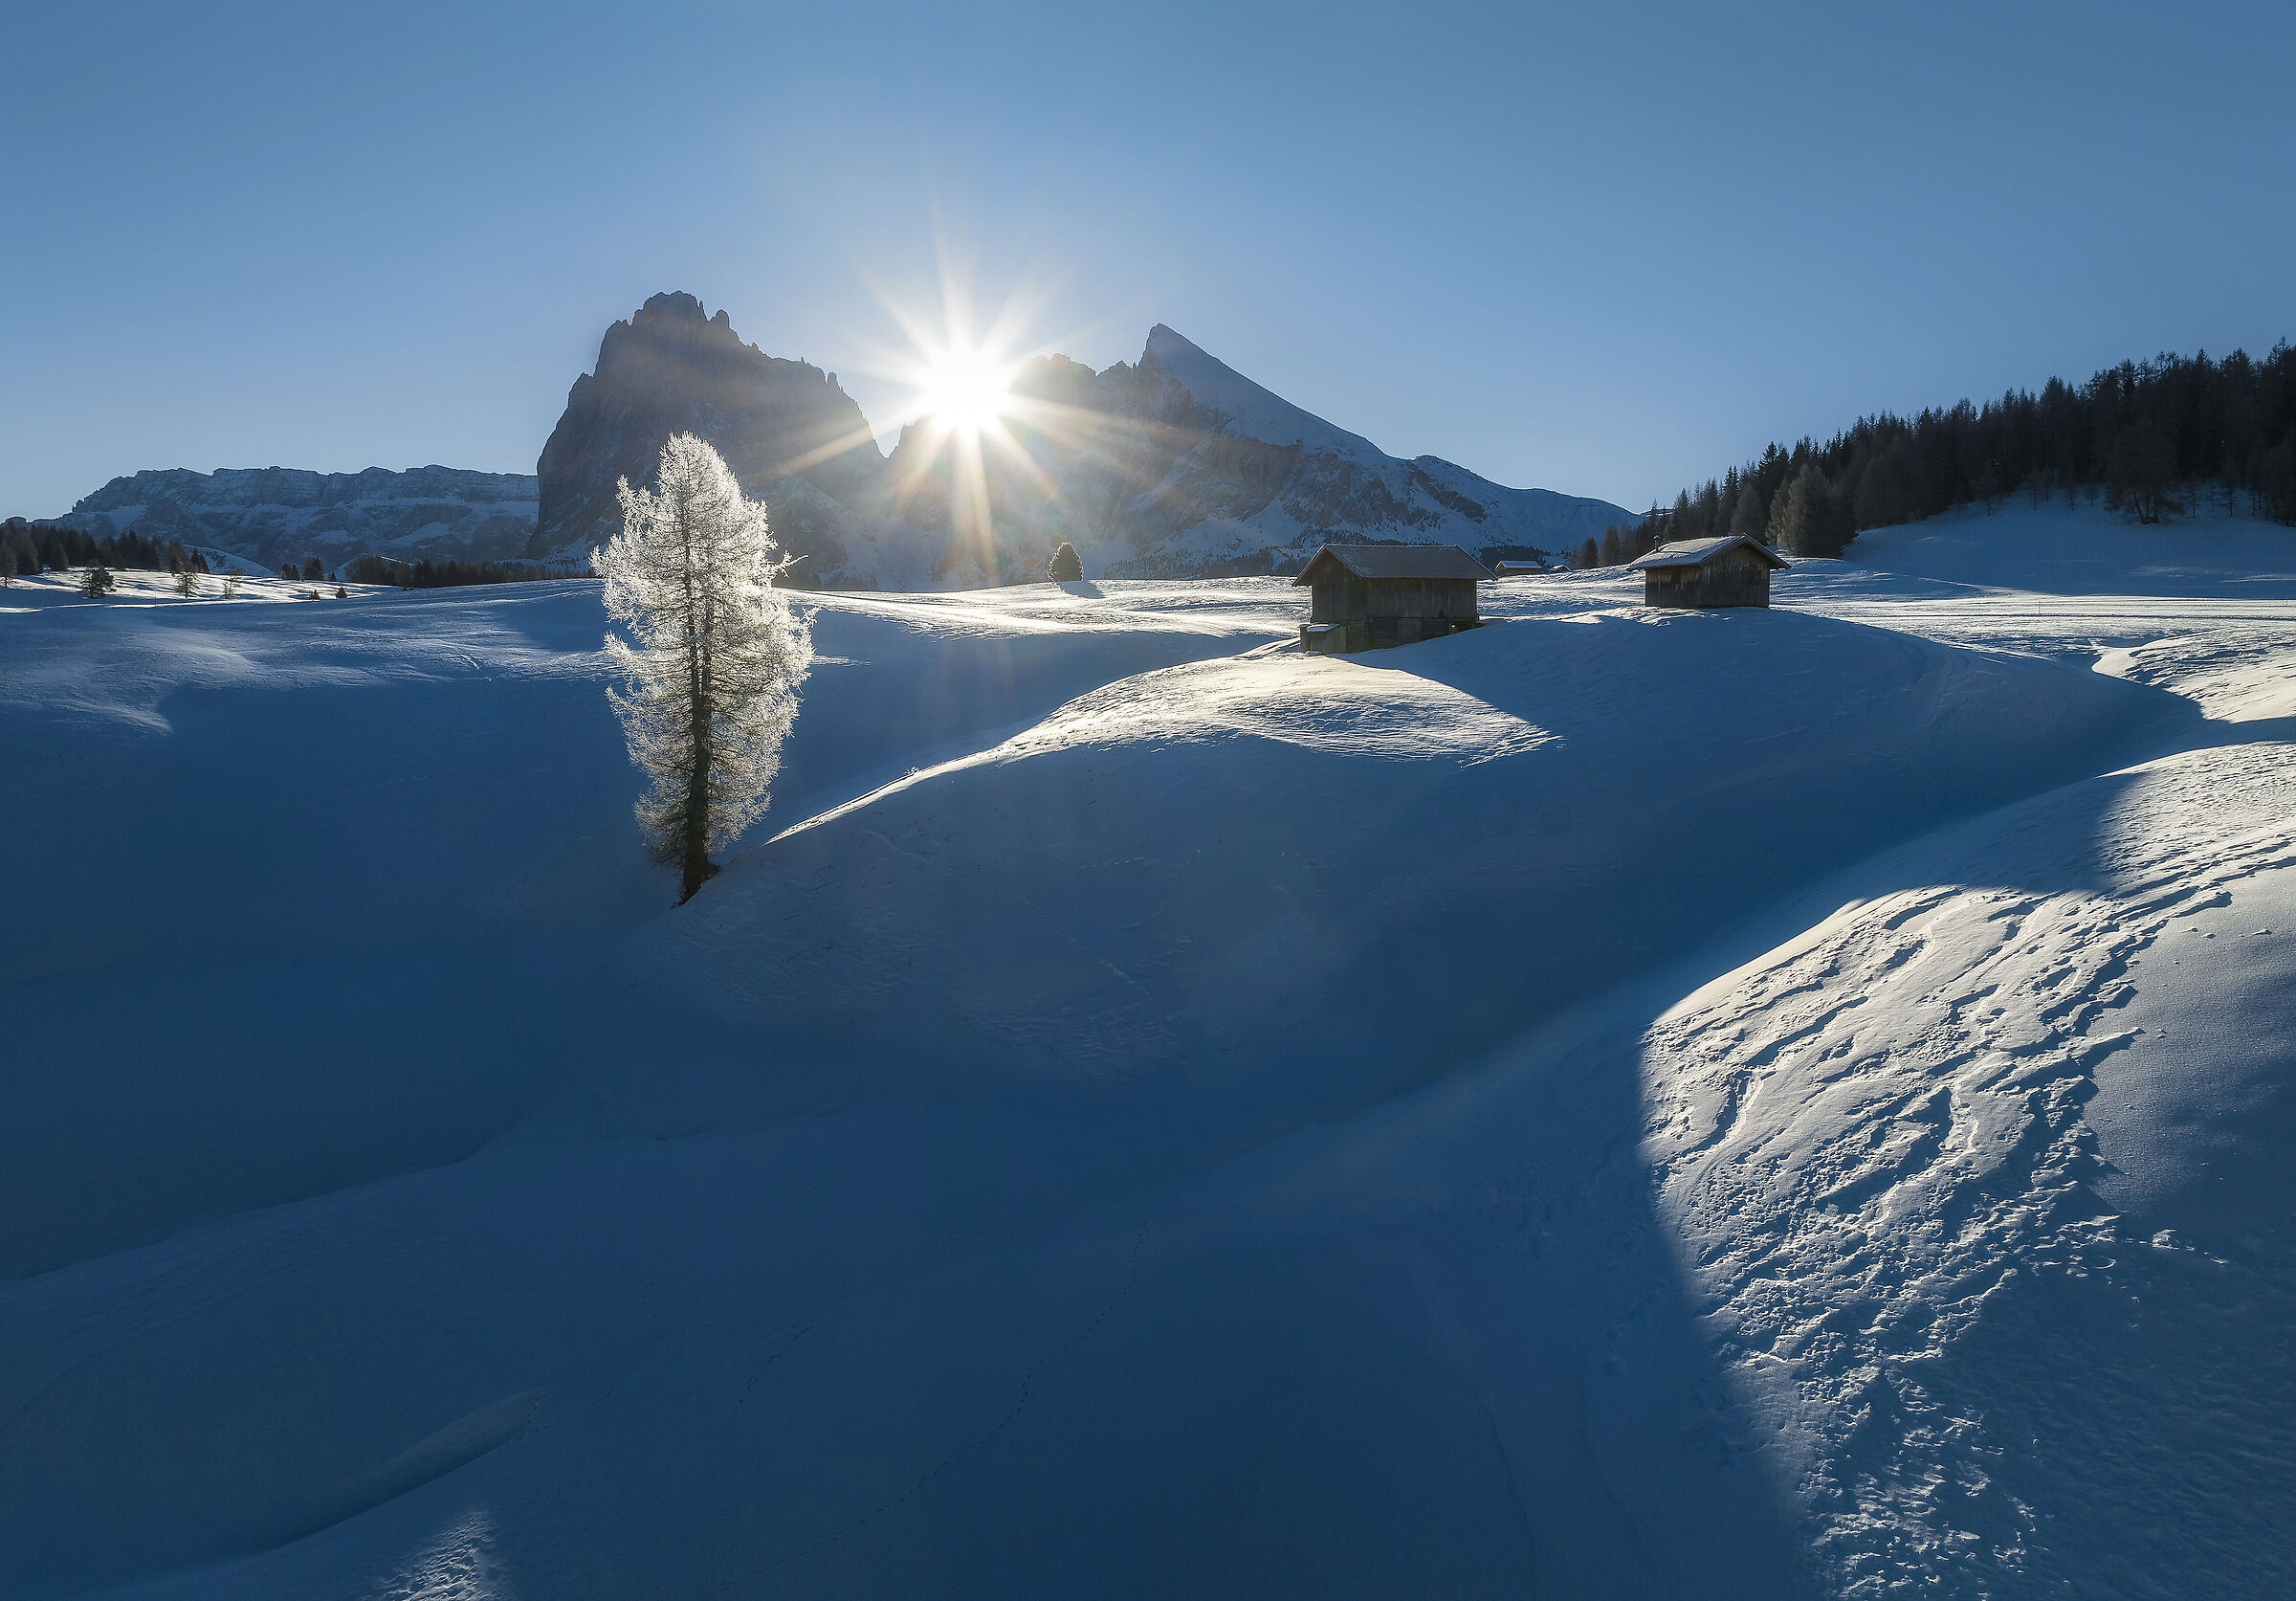 Another one from the Seiser Alm winter paradise...